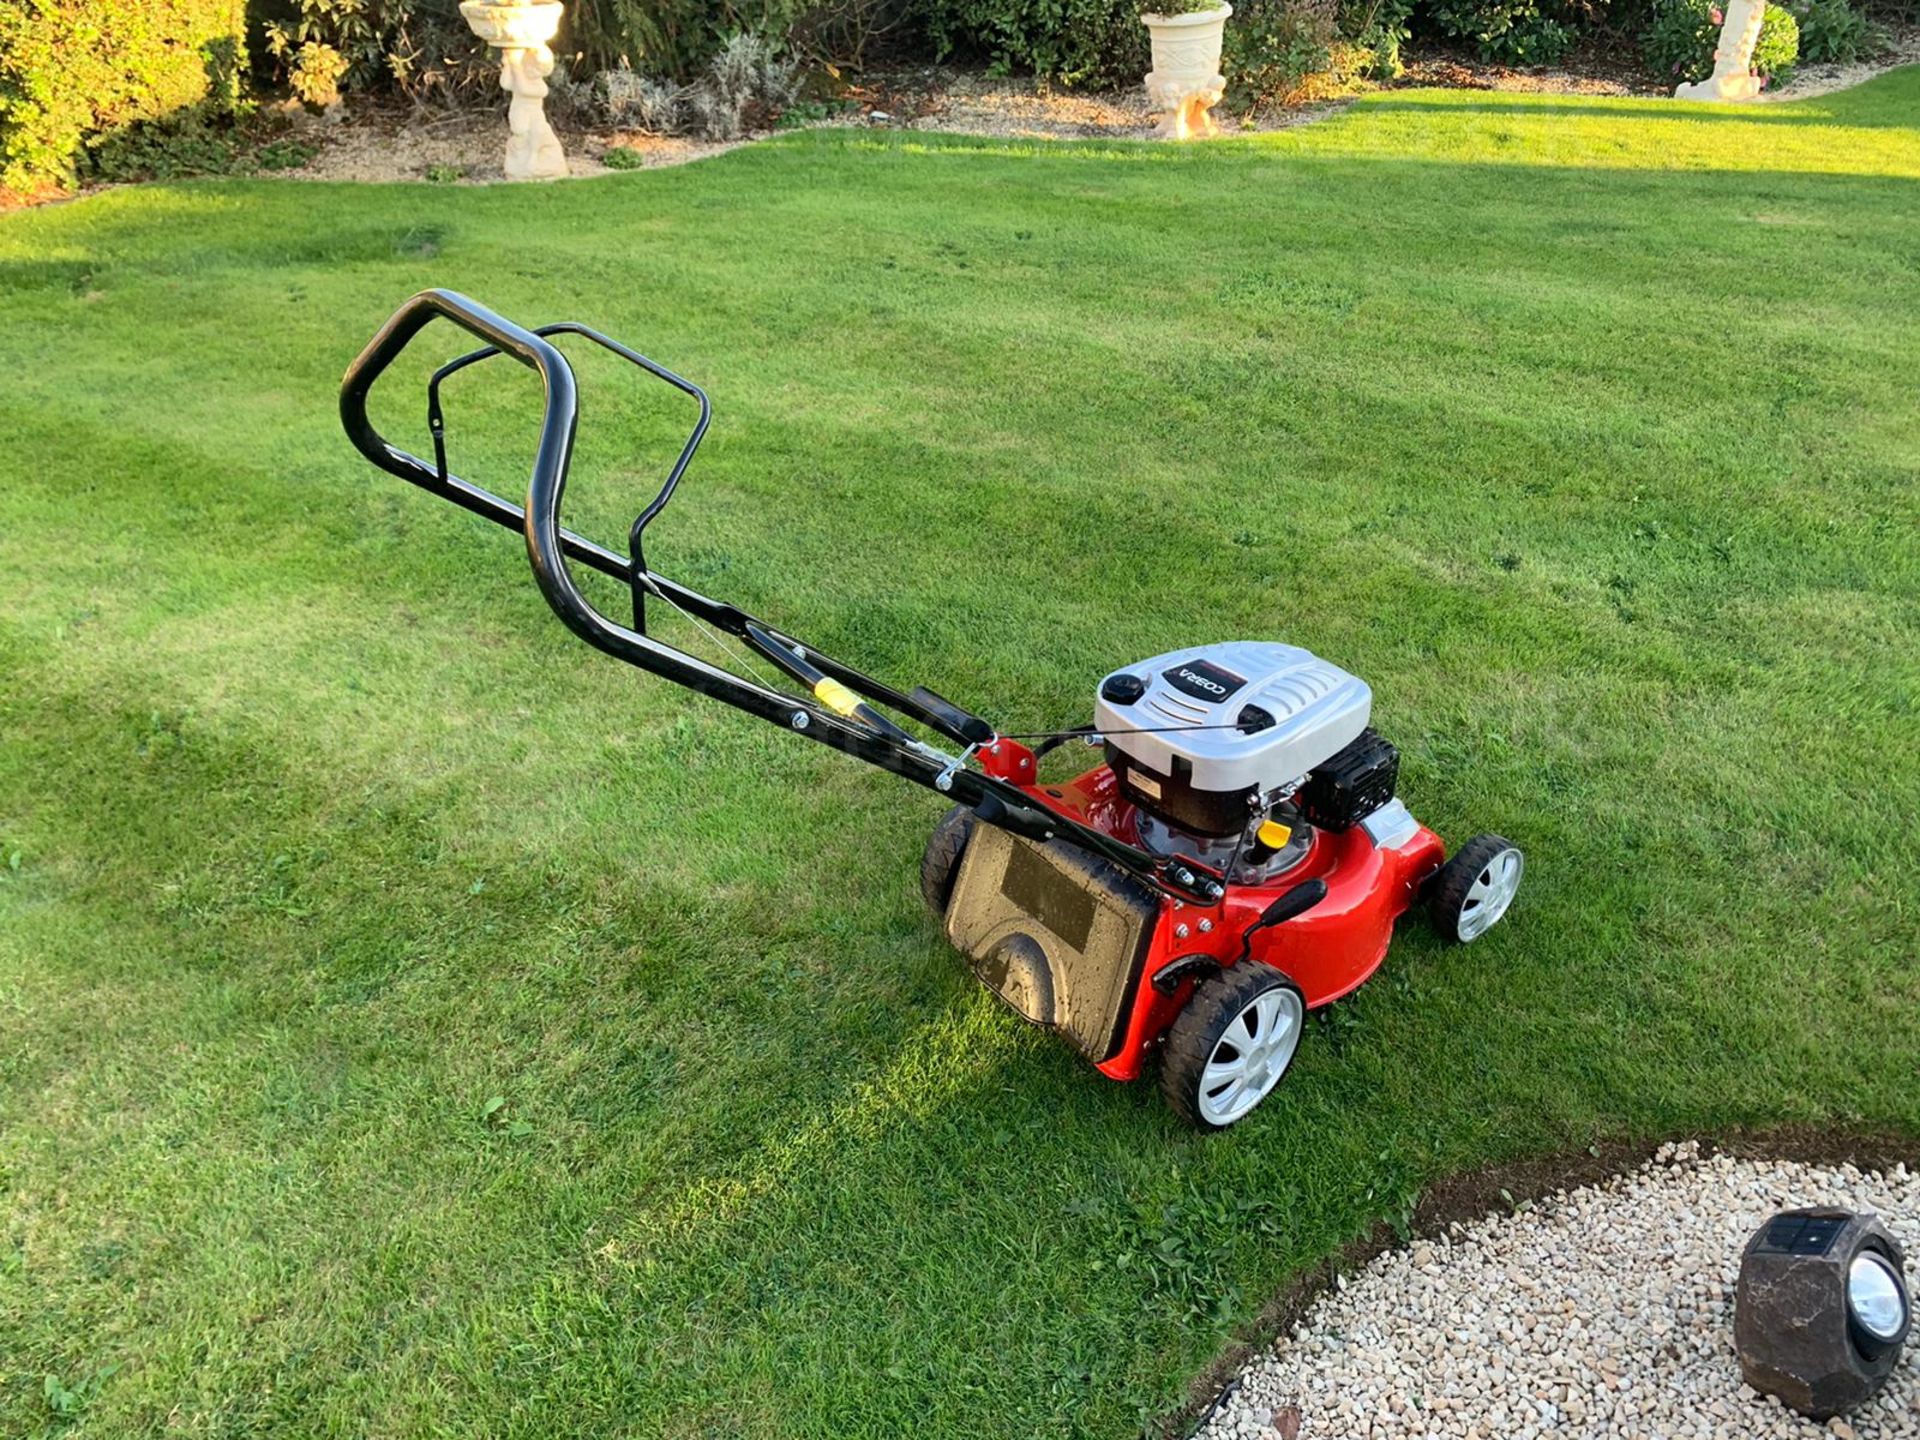 2016 COBRA M40C LAWN MOWER, RUNS AND WORKS WELL, ONLY USED A FEW TIMES, PULL START *NO VAT* - Image 10 of 18